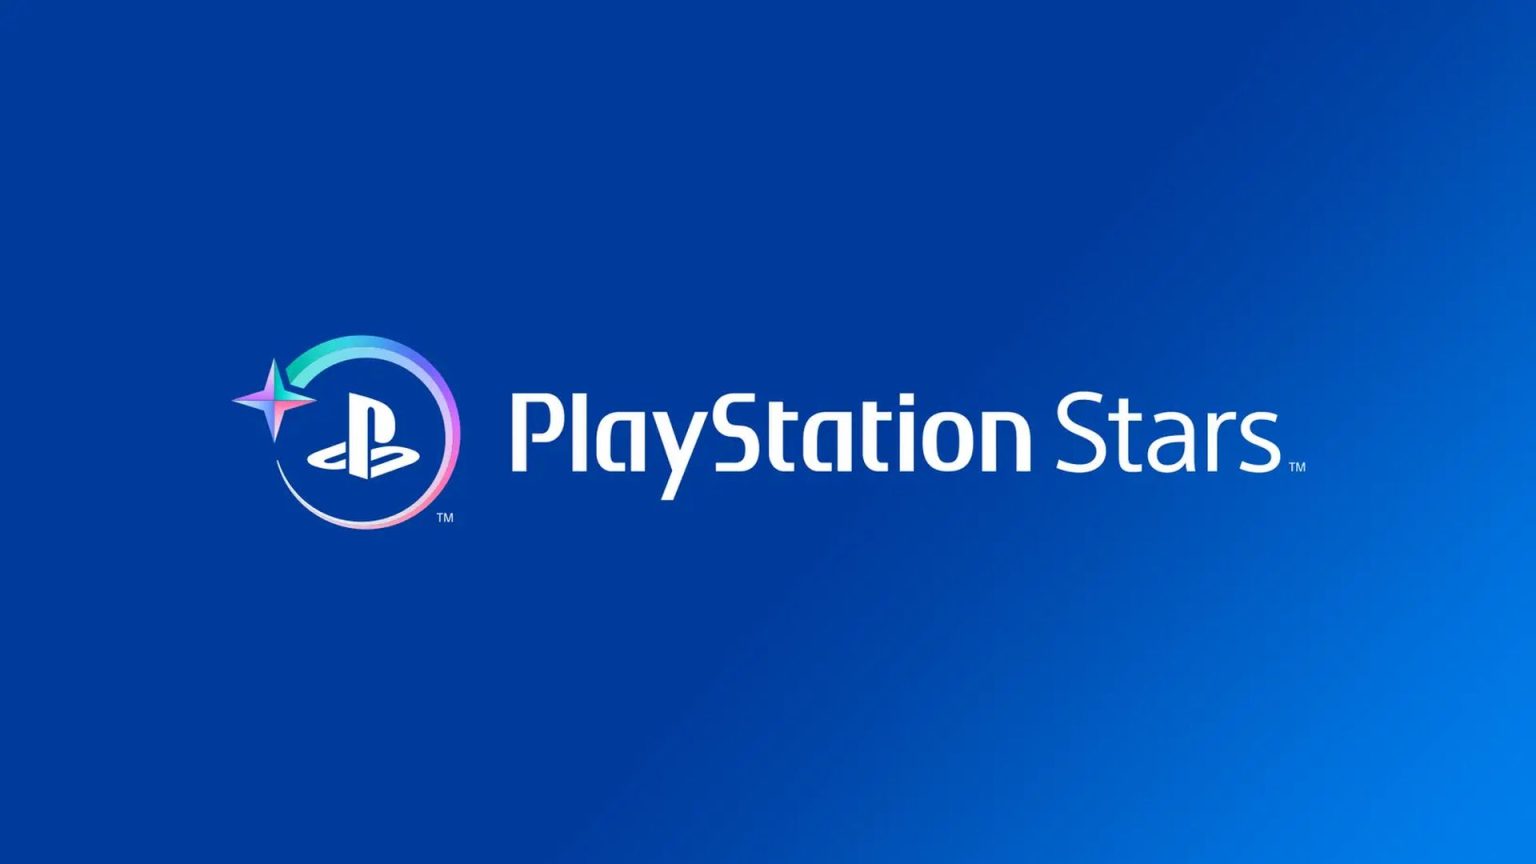 PlayStation Stars Announced, Loyalty Program Launches Later This Year